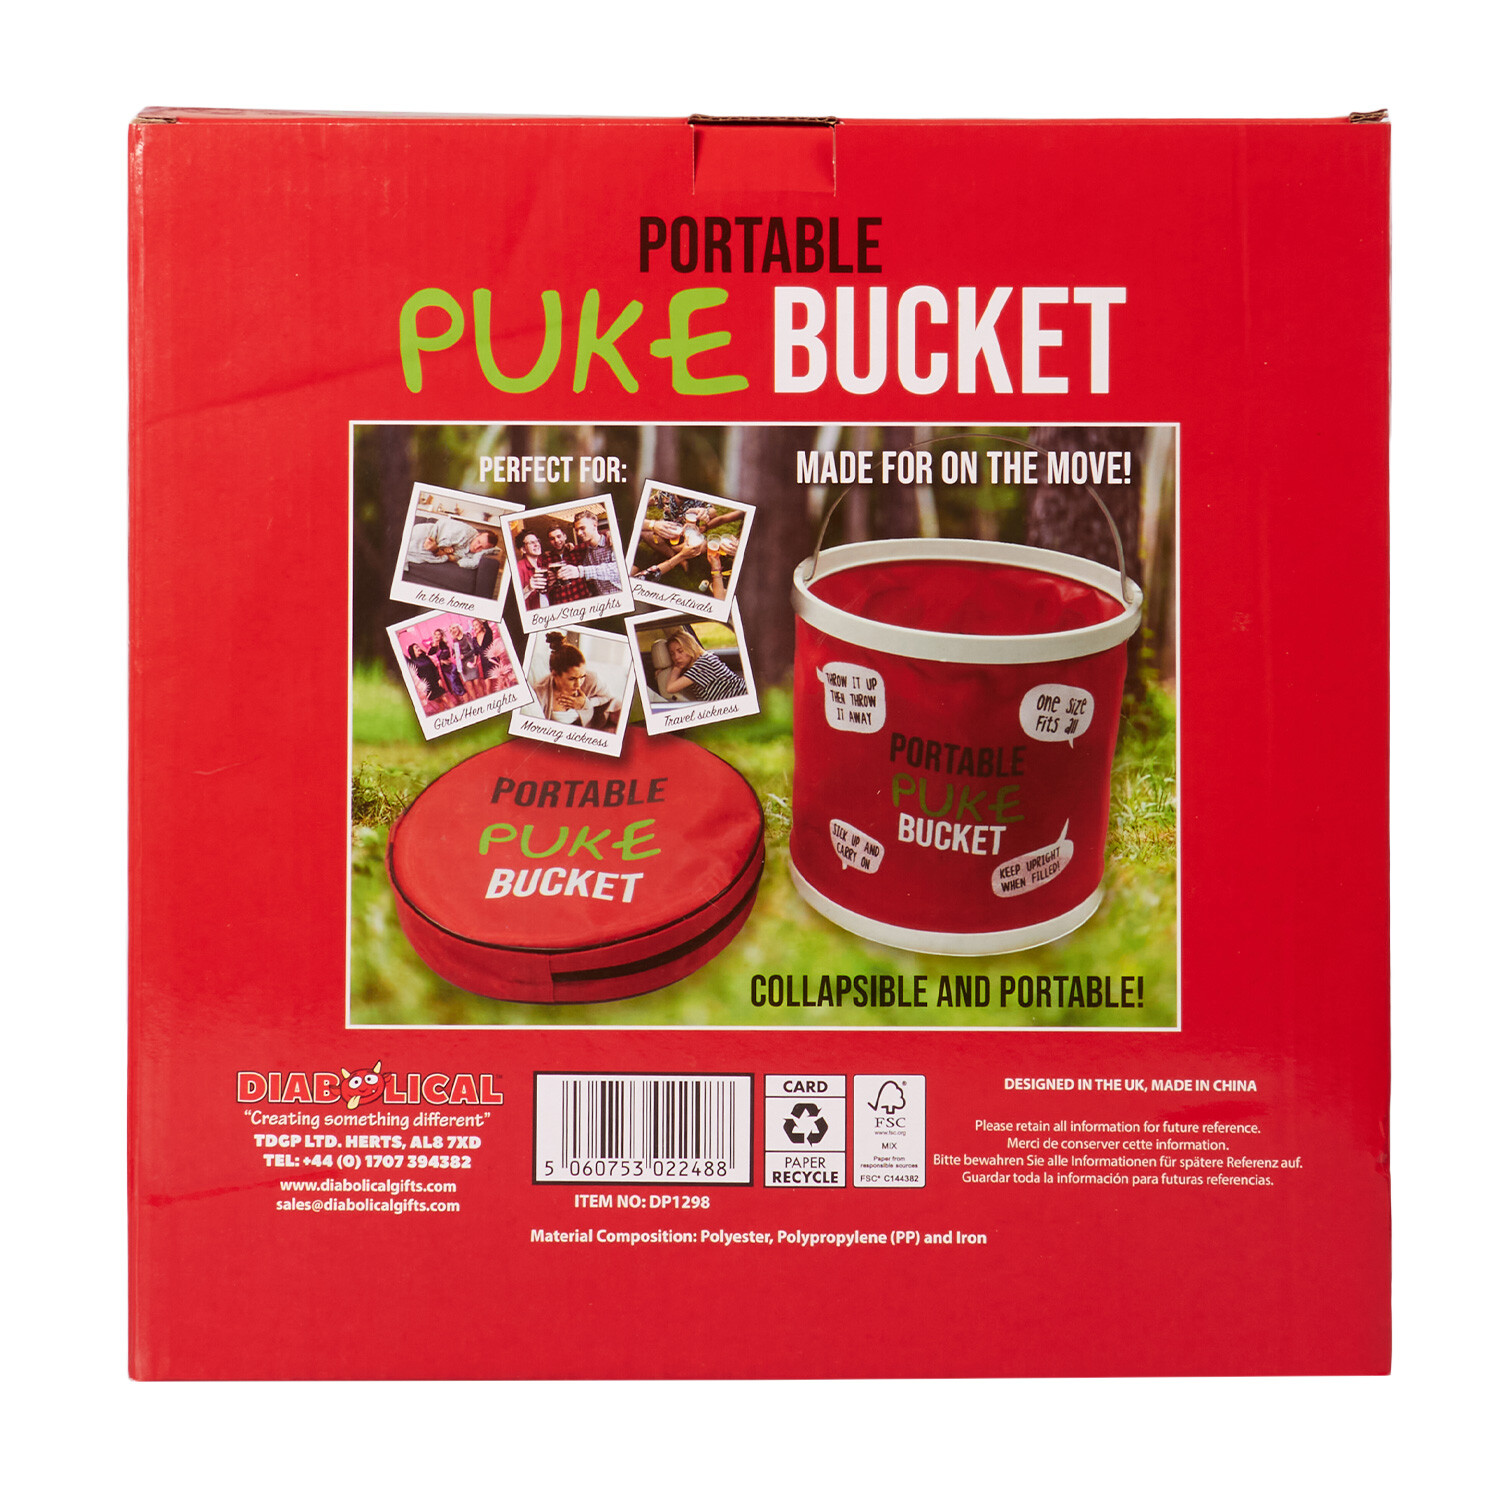 Diabolical Gifts Red Portable Puke Bucket Image 5